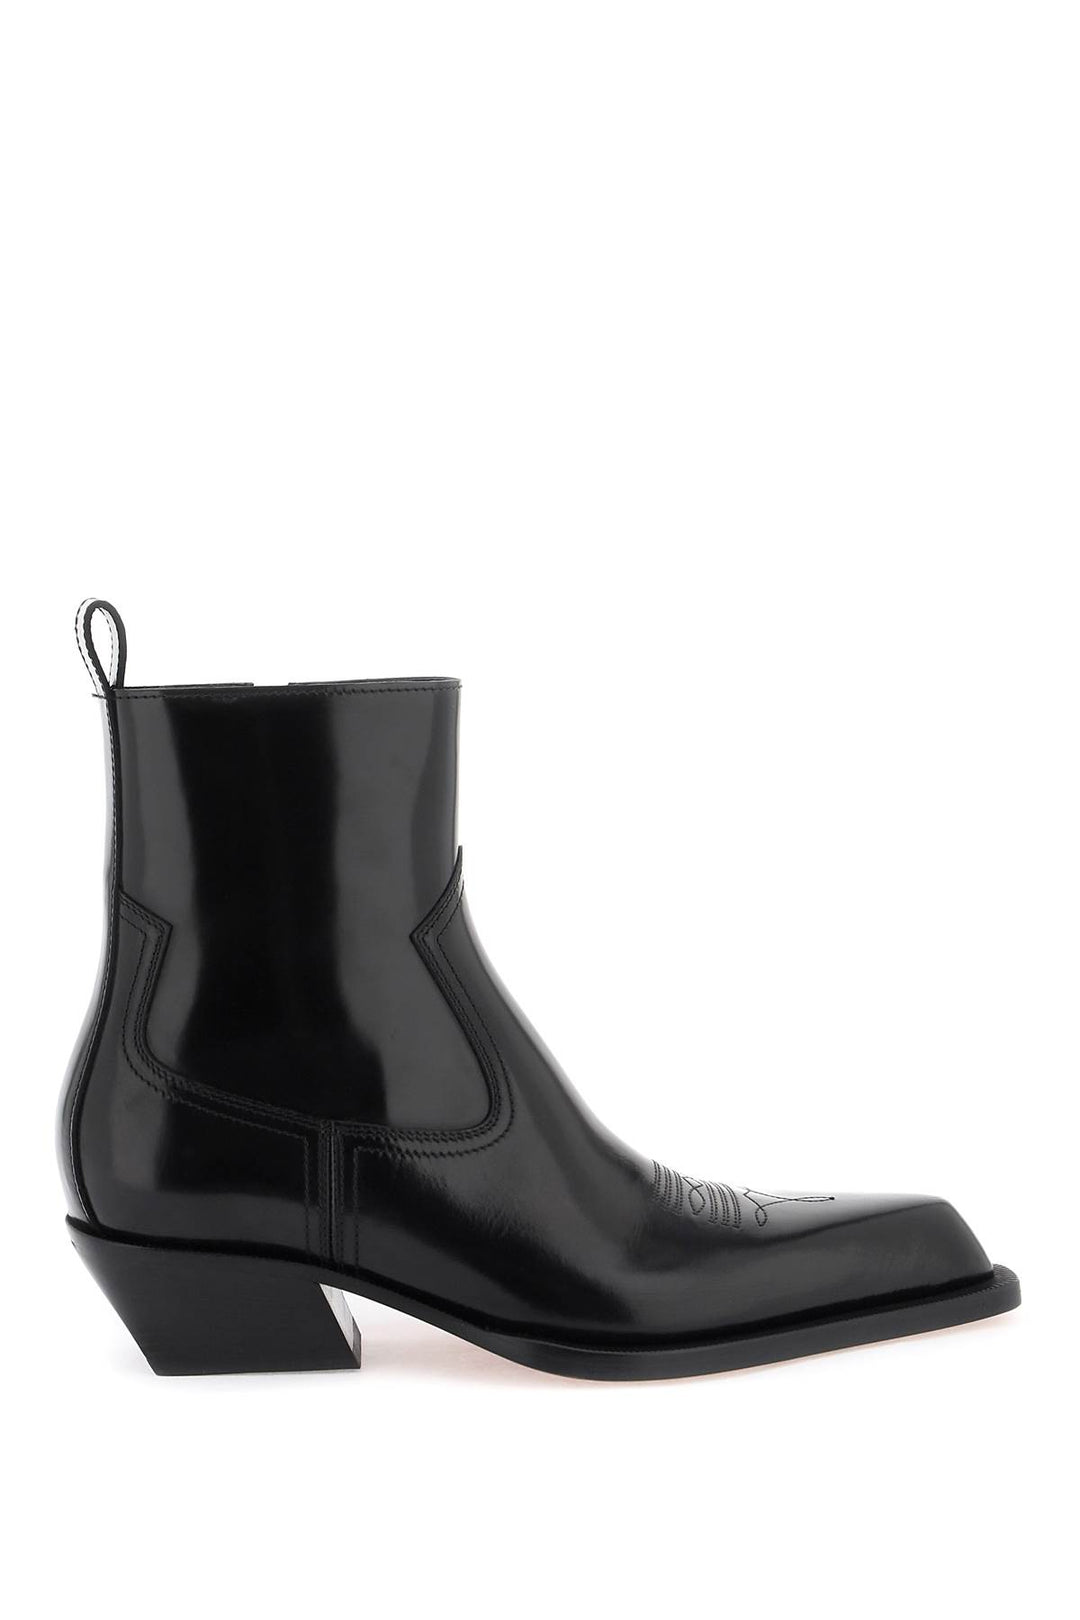 Off White Leather Texan Ankle Boots   Nero